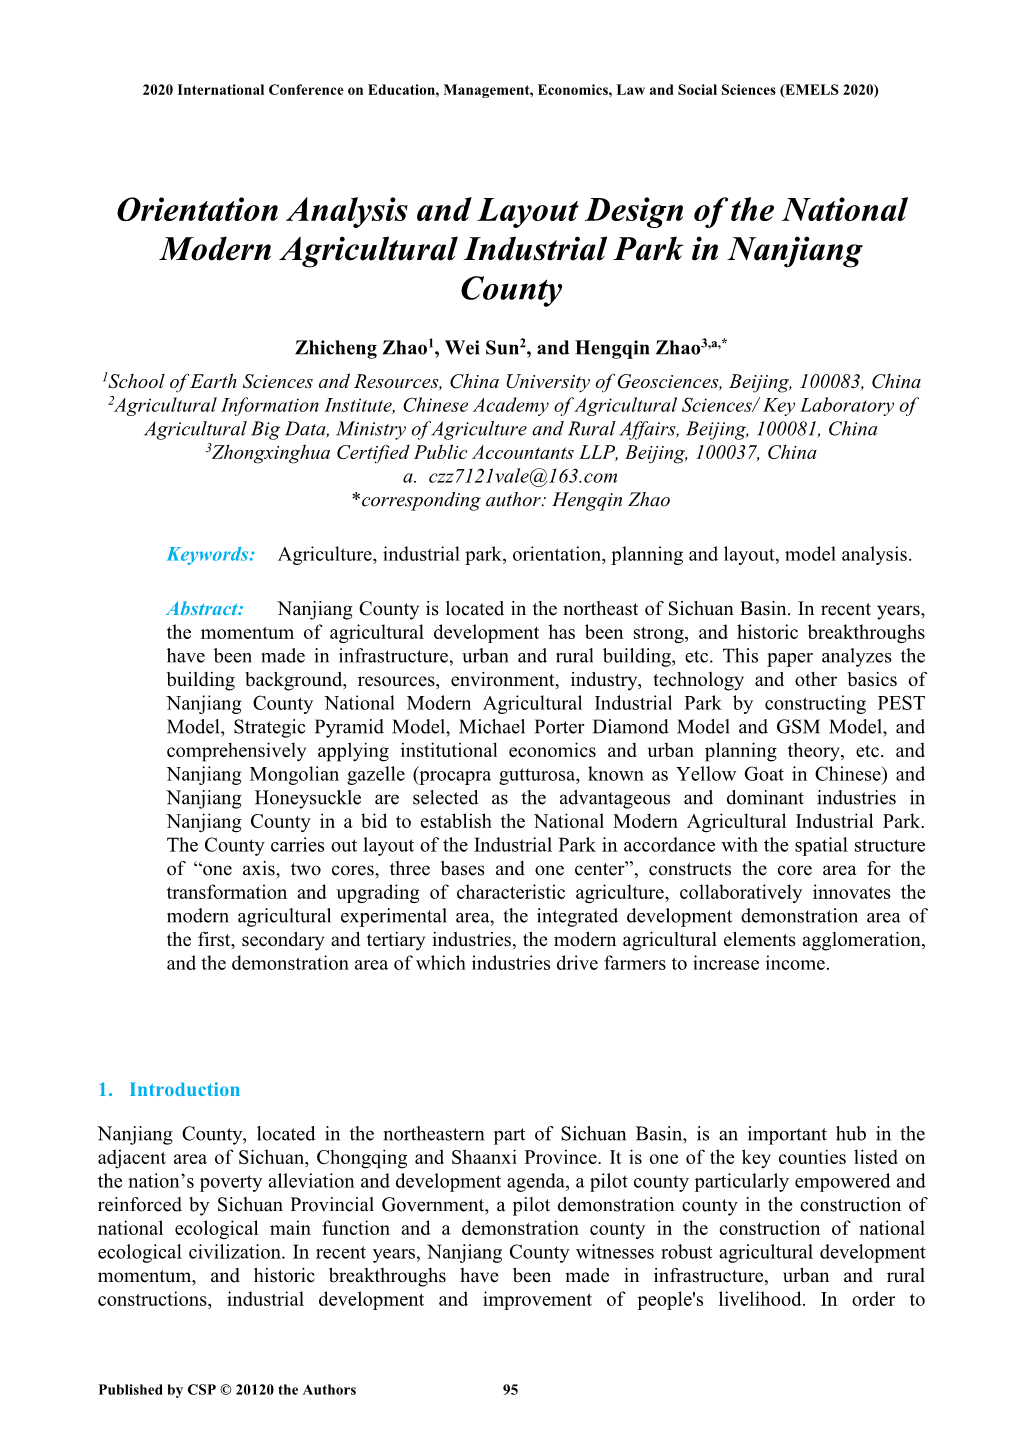 Orientation Analysis and Layout Design of the National Modern Agricultural Industrial Park in Nanjiang County